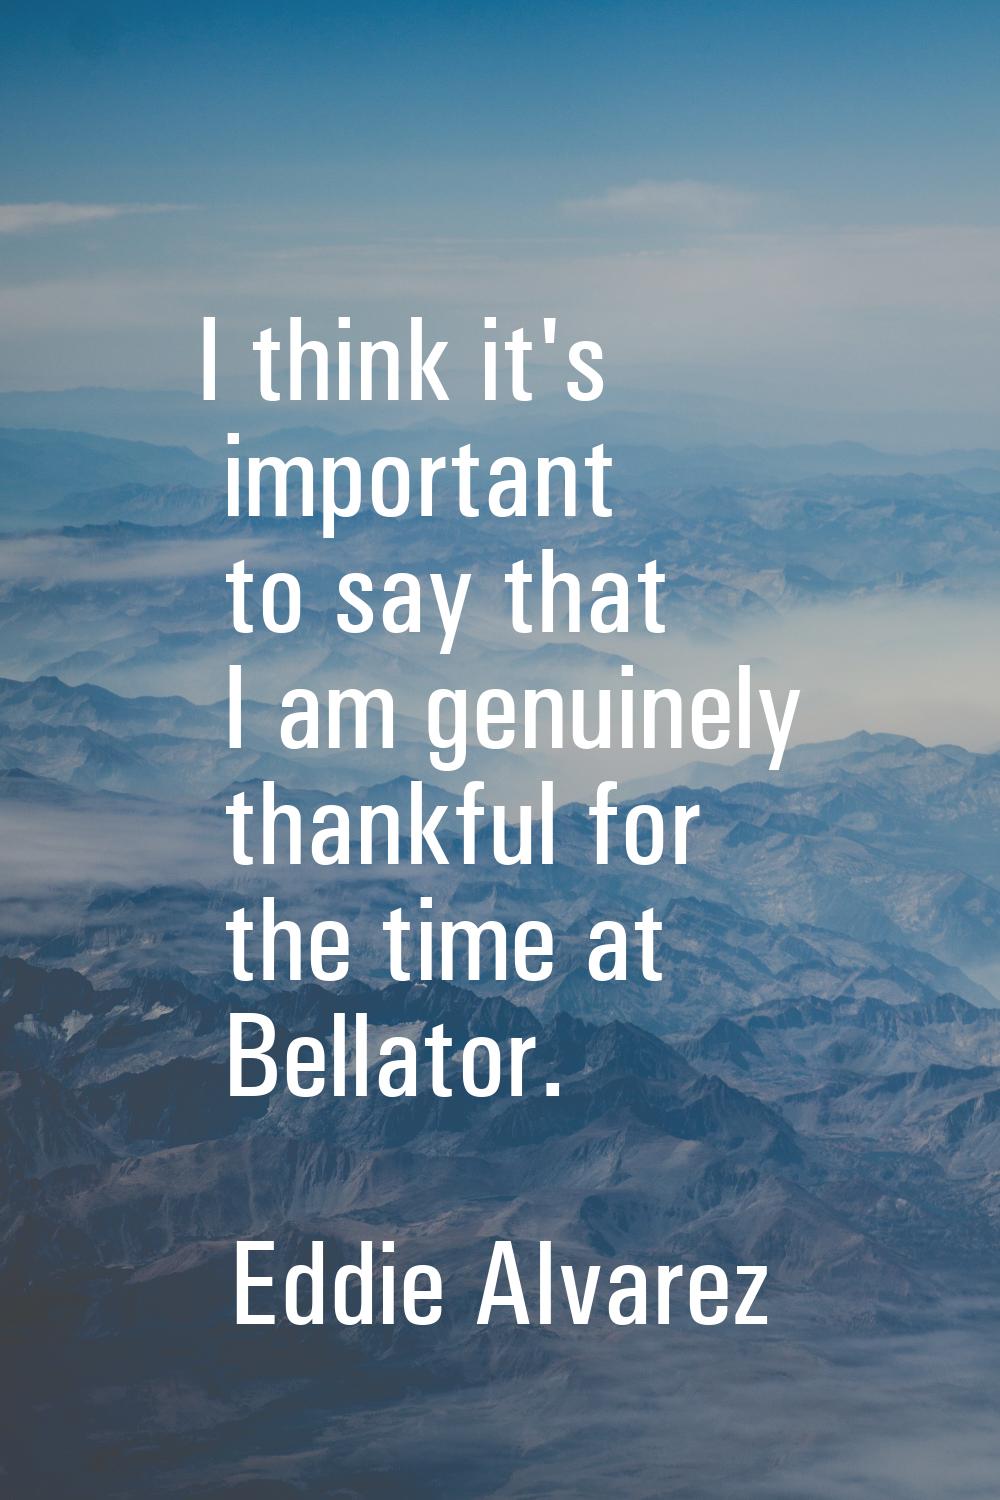 I think it's important to say that I am genuinely thankful for the time at Bellator.